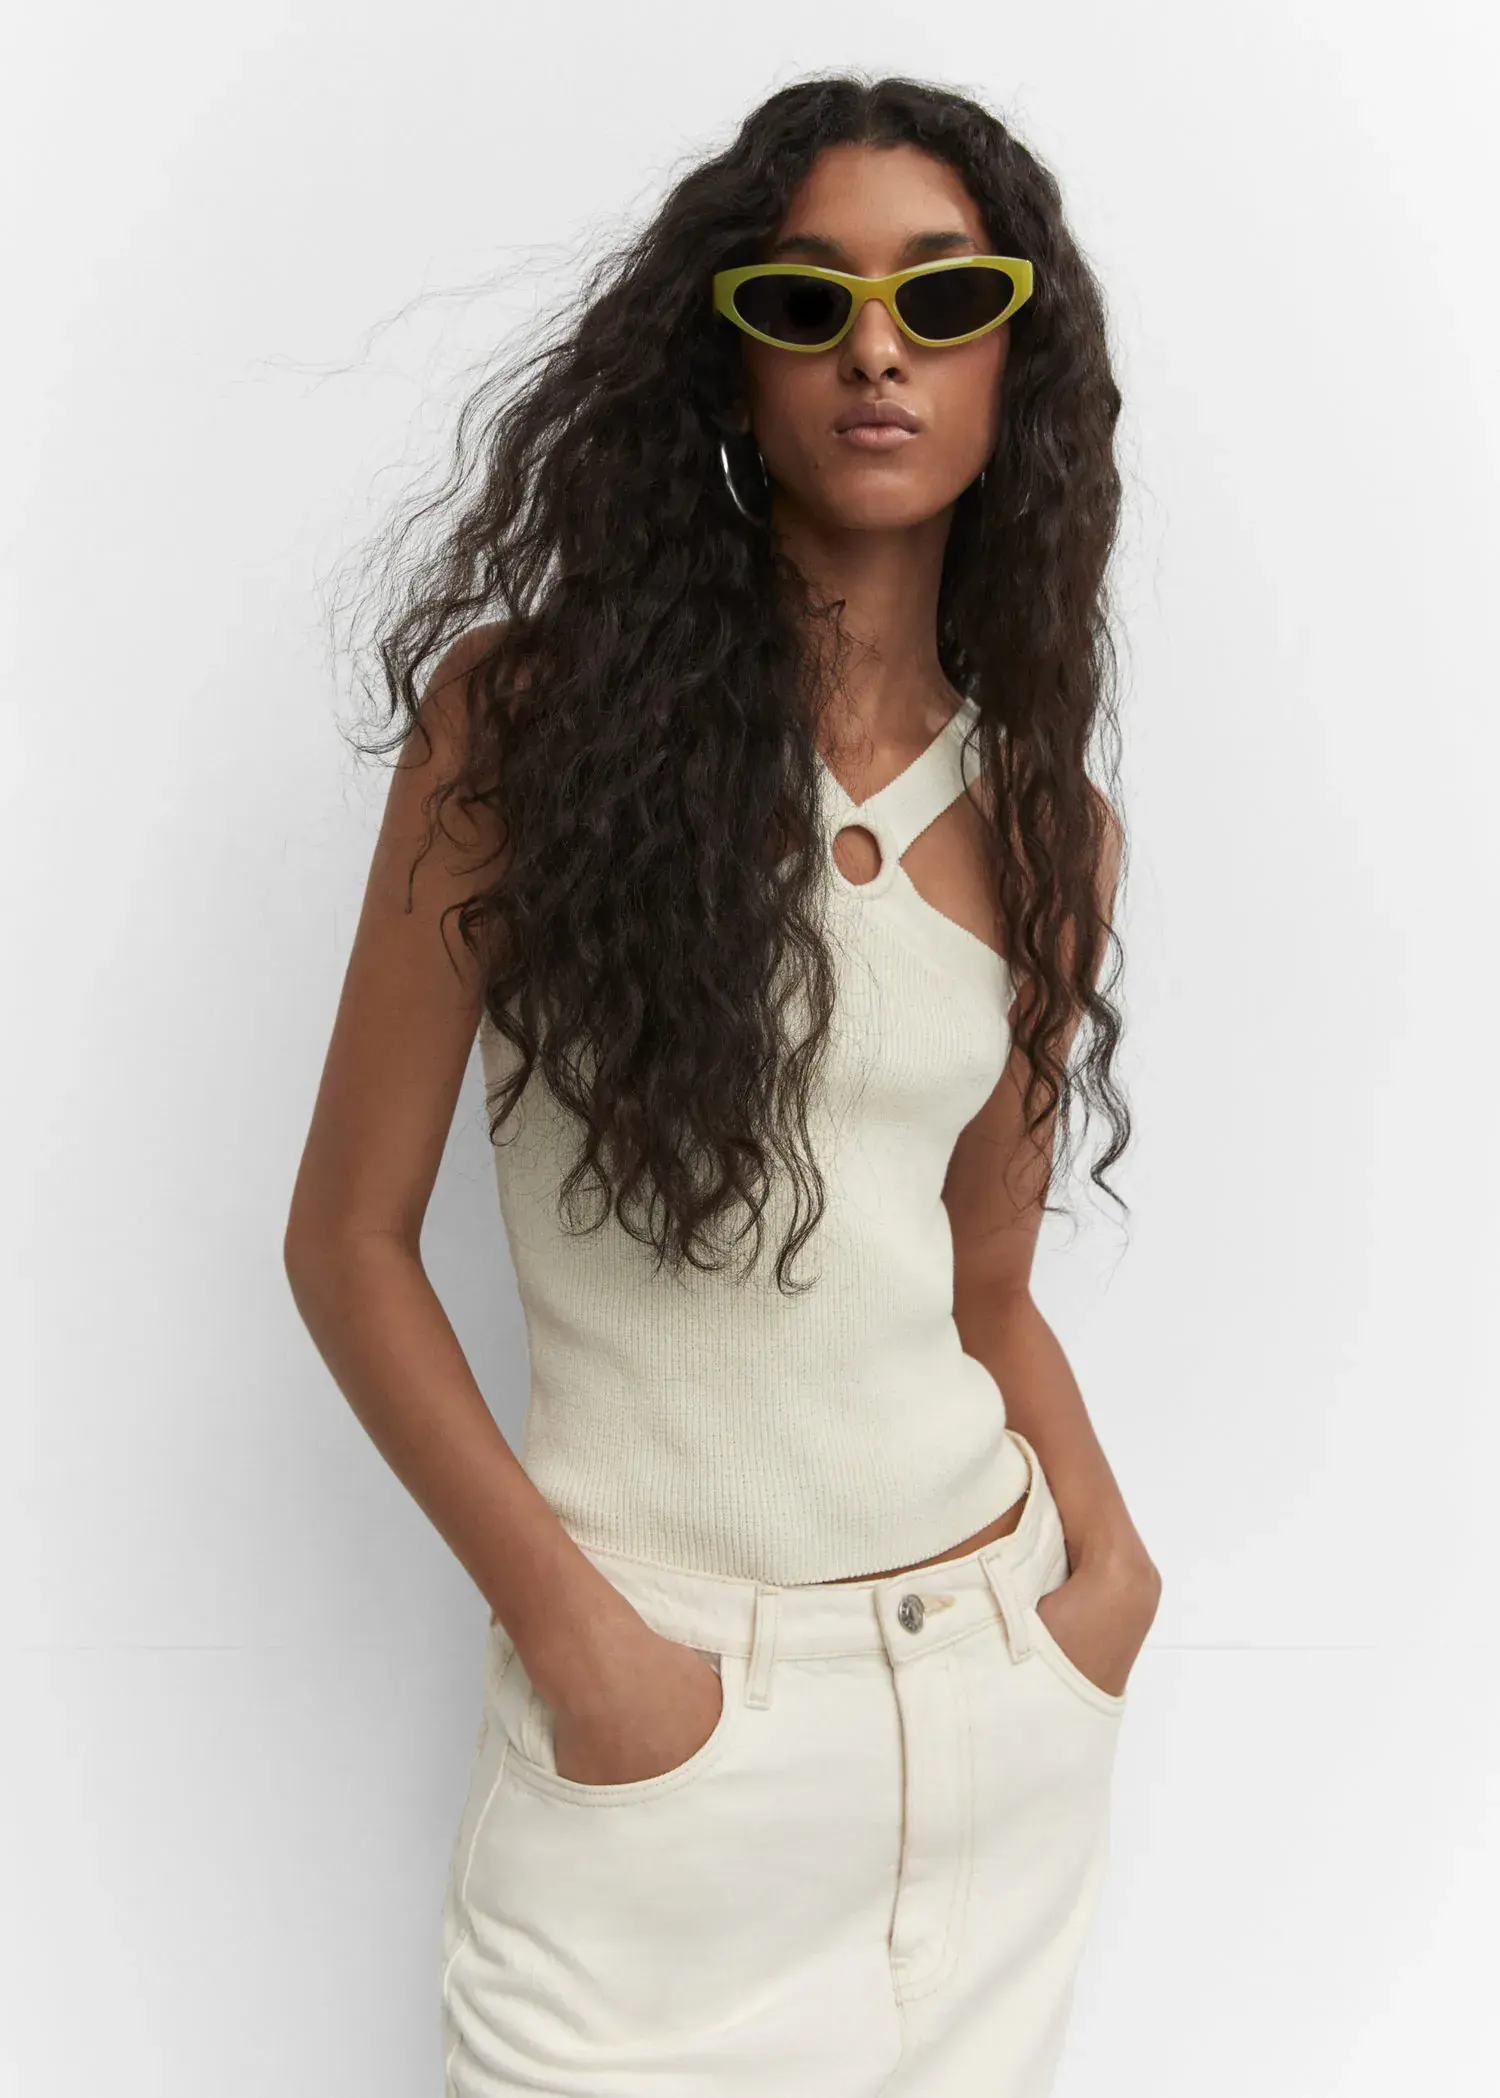 Mango Retro style sunglasses. a woman with long curly hair wearing sunglasses. 